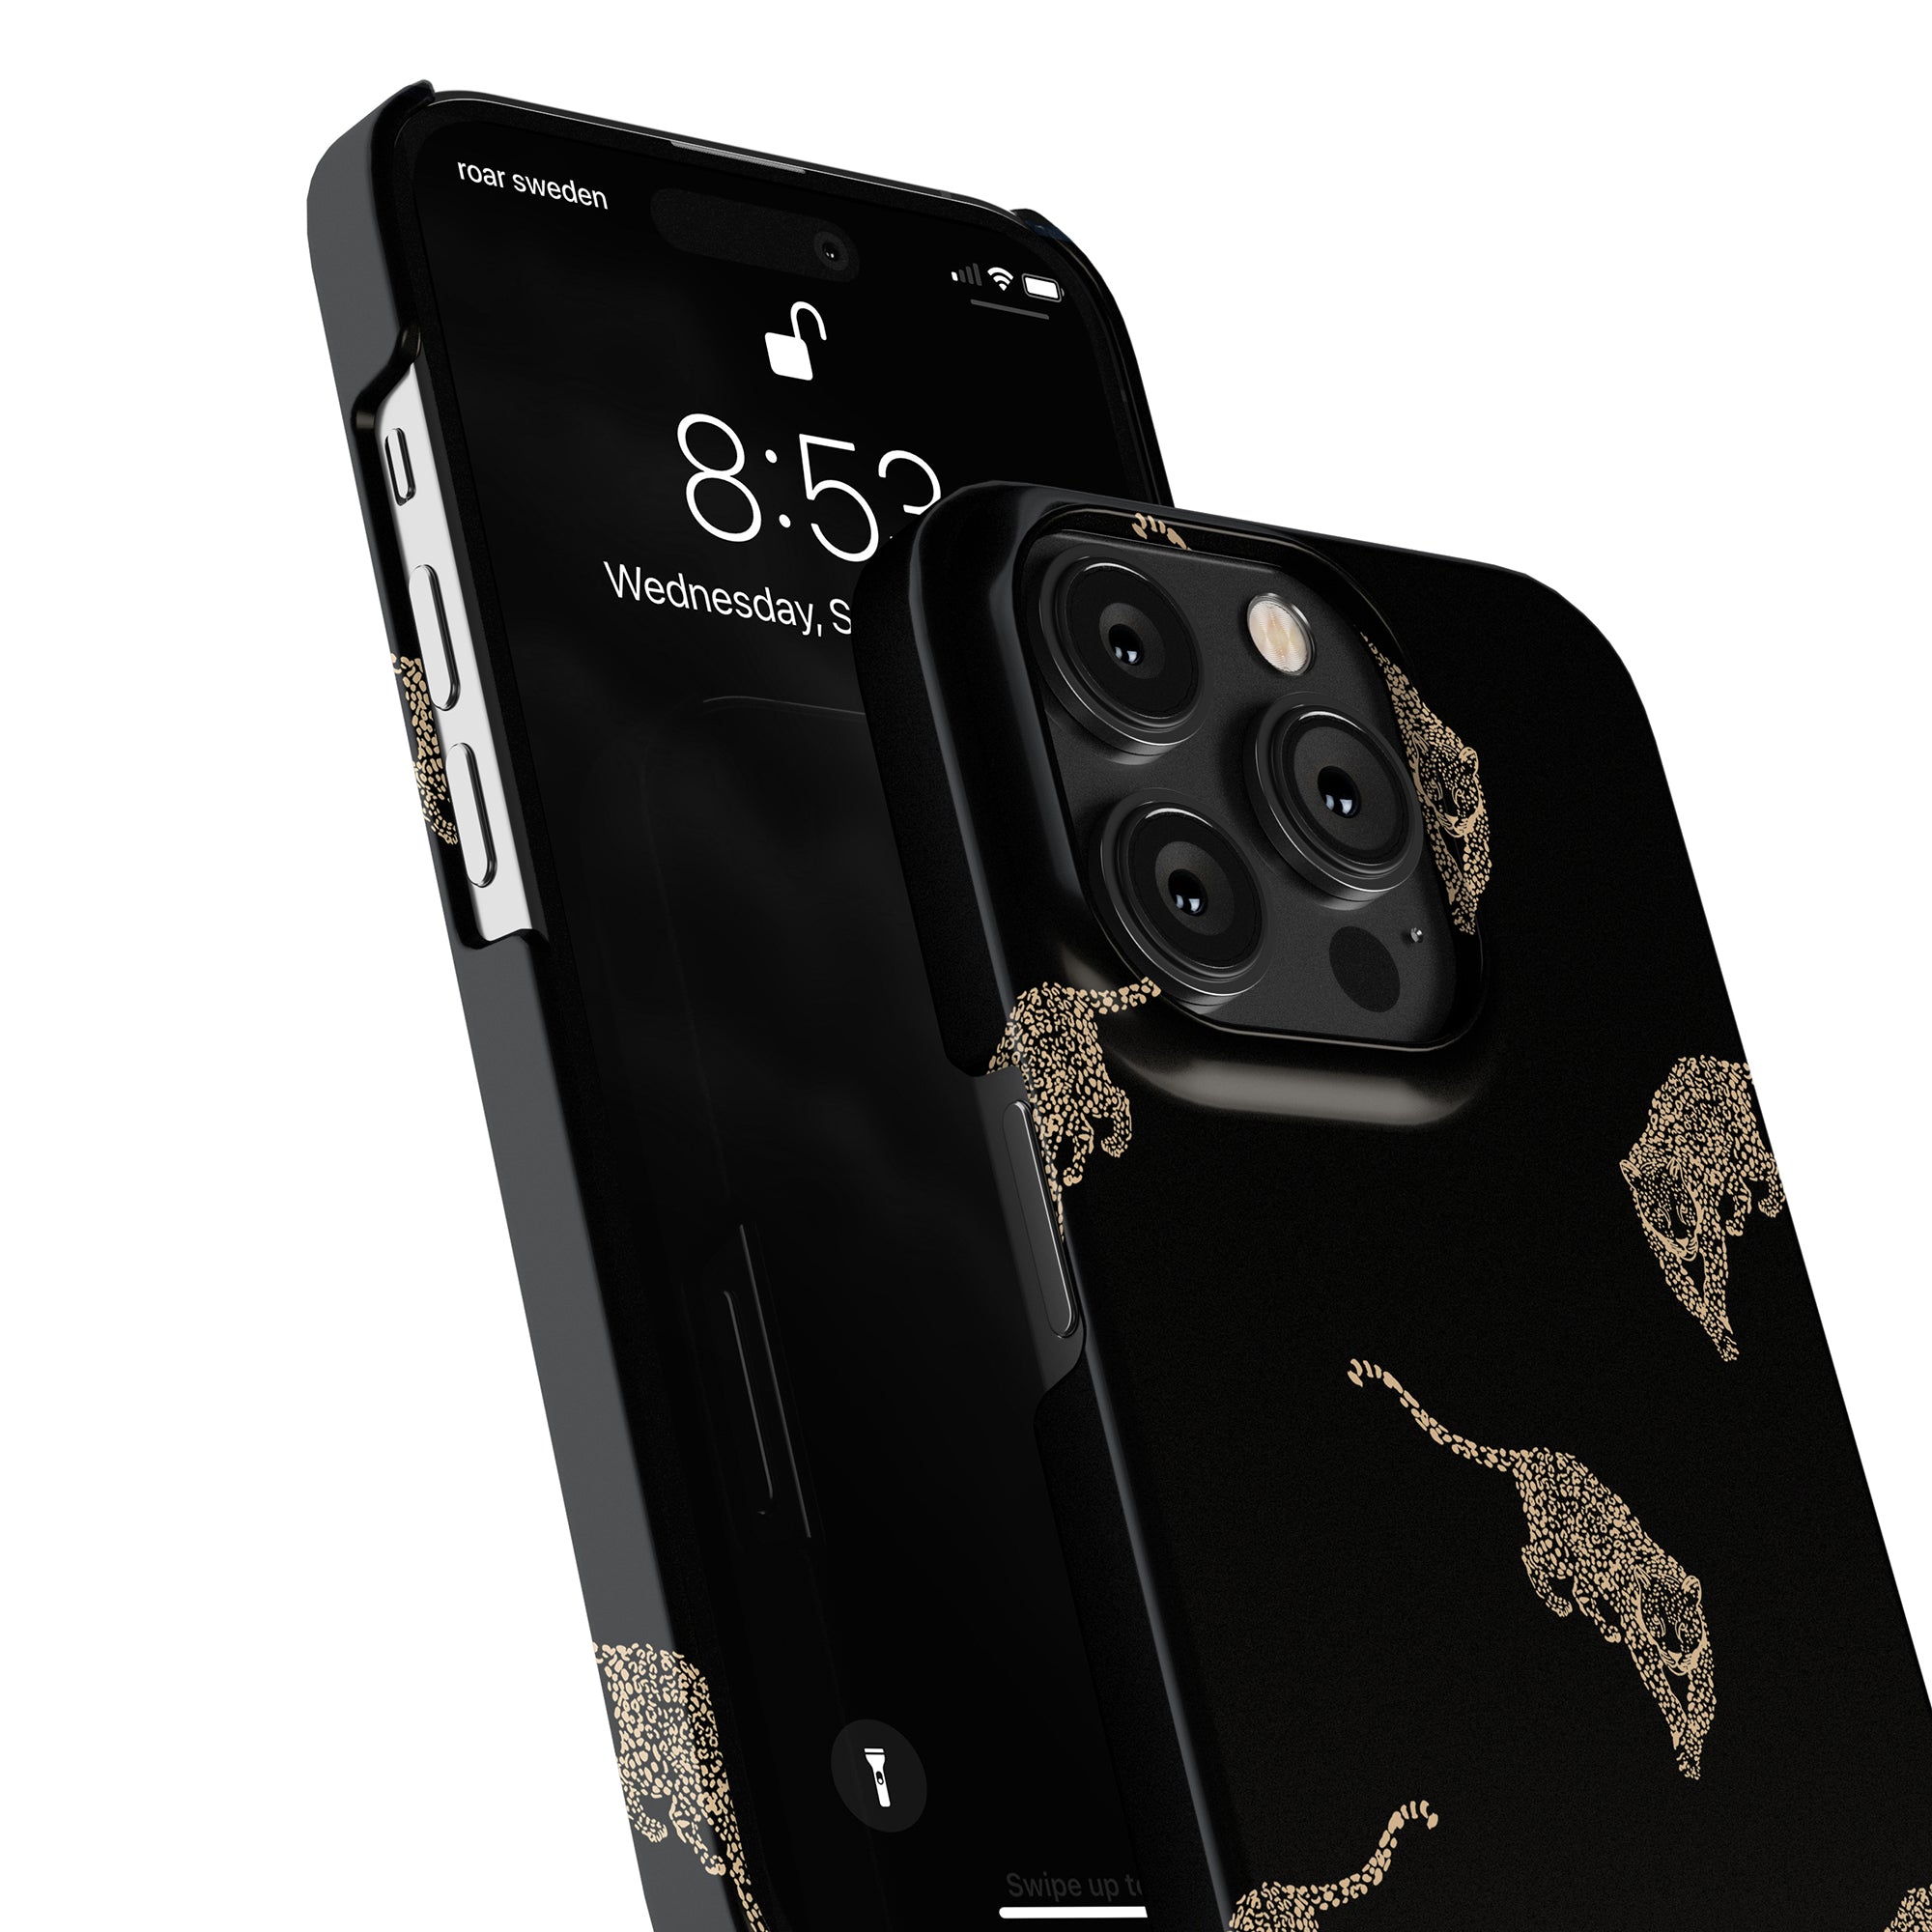 An elegant Kitty Black - Slim case smartphone case for the iPhone 11 Pro.